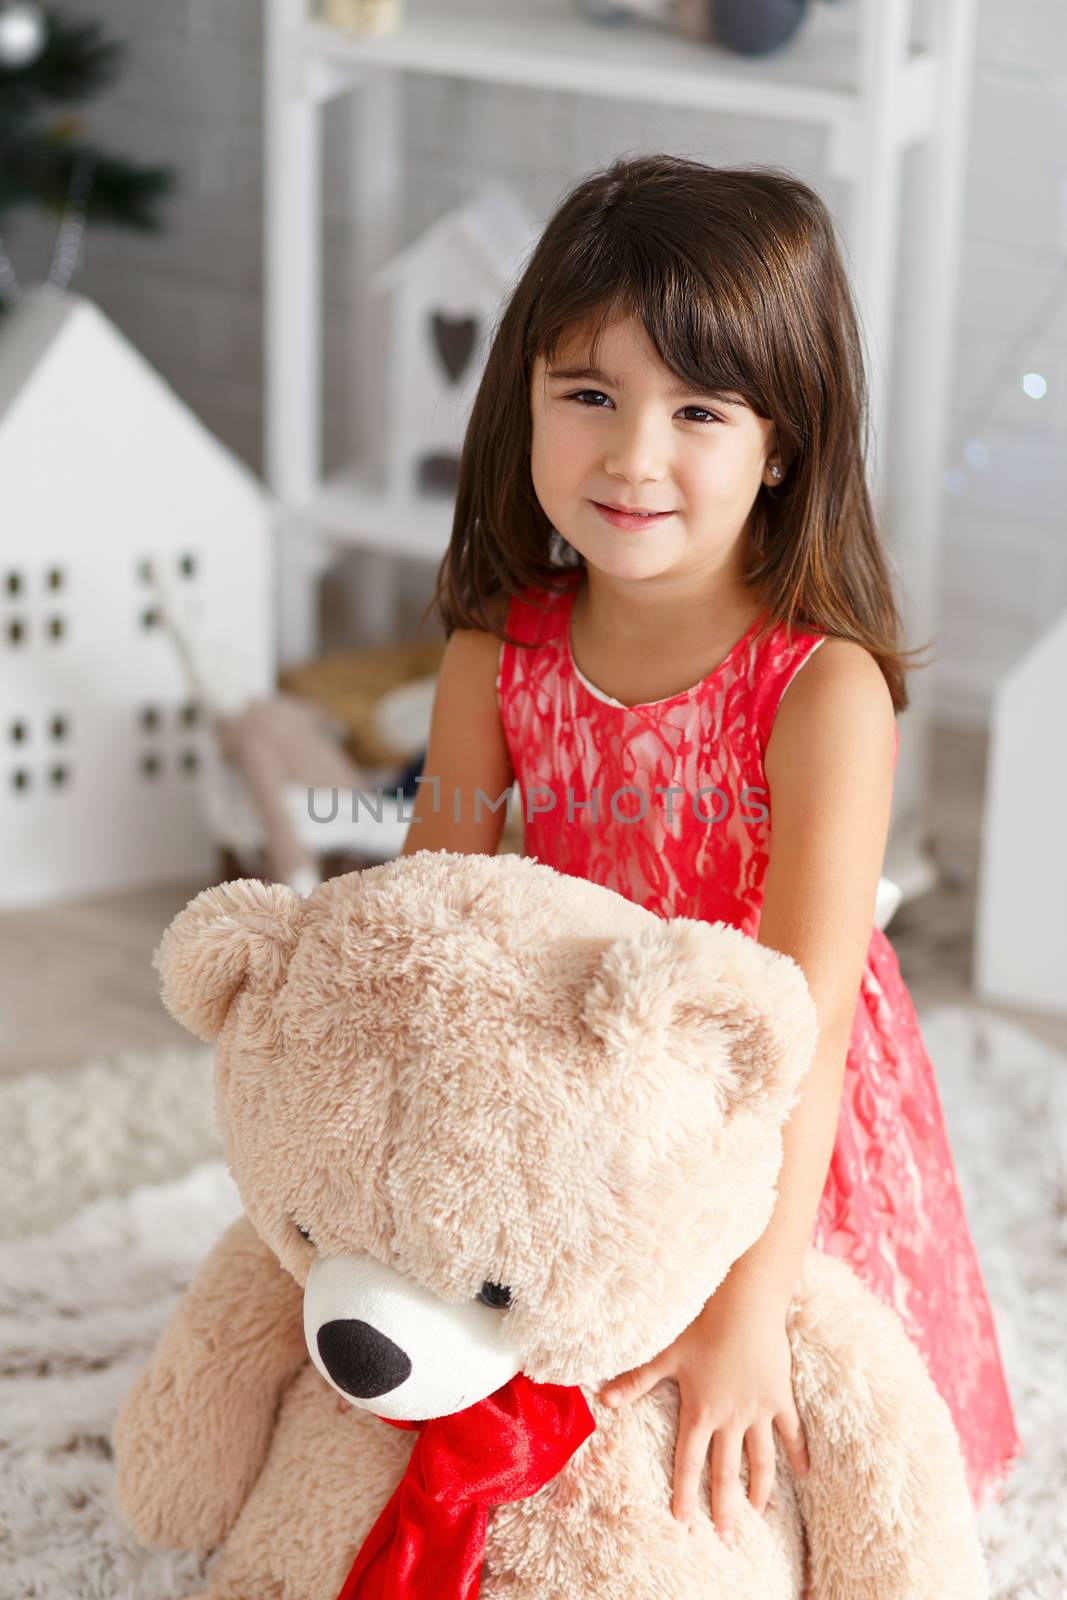 Portrait of a cute little brunette girl hugging a soft big teddy bear in interior with Christmas decorations